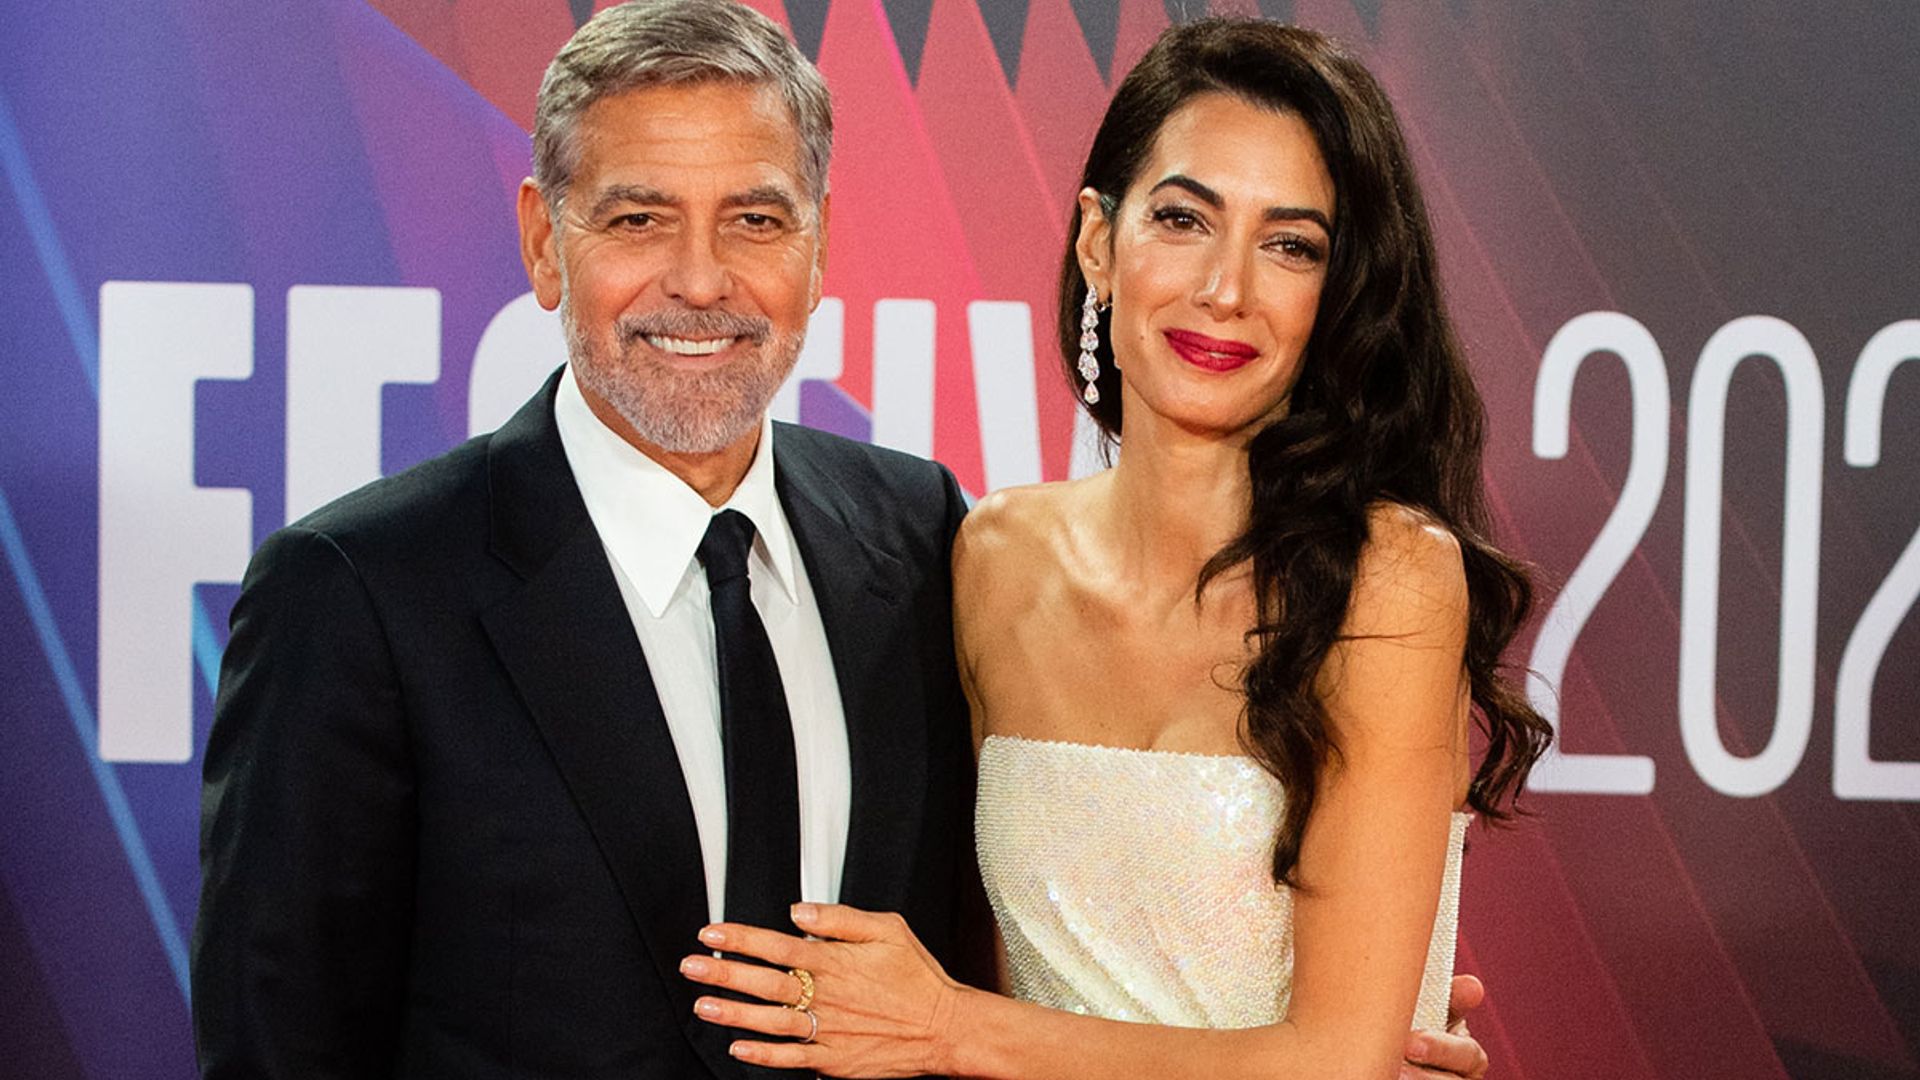 George Clooney reveals why he and wife